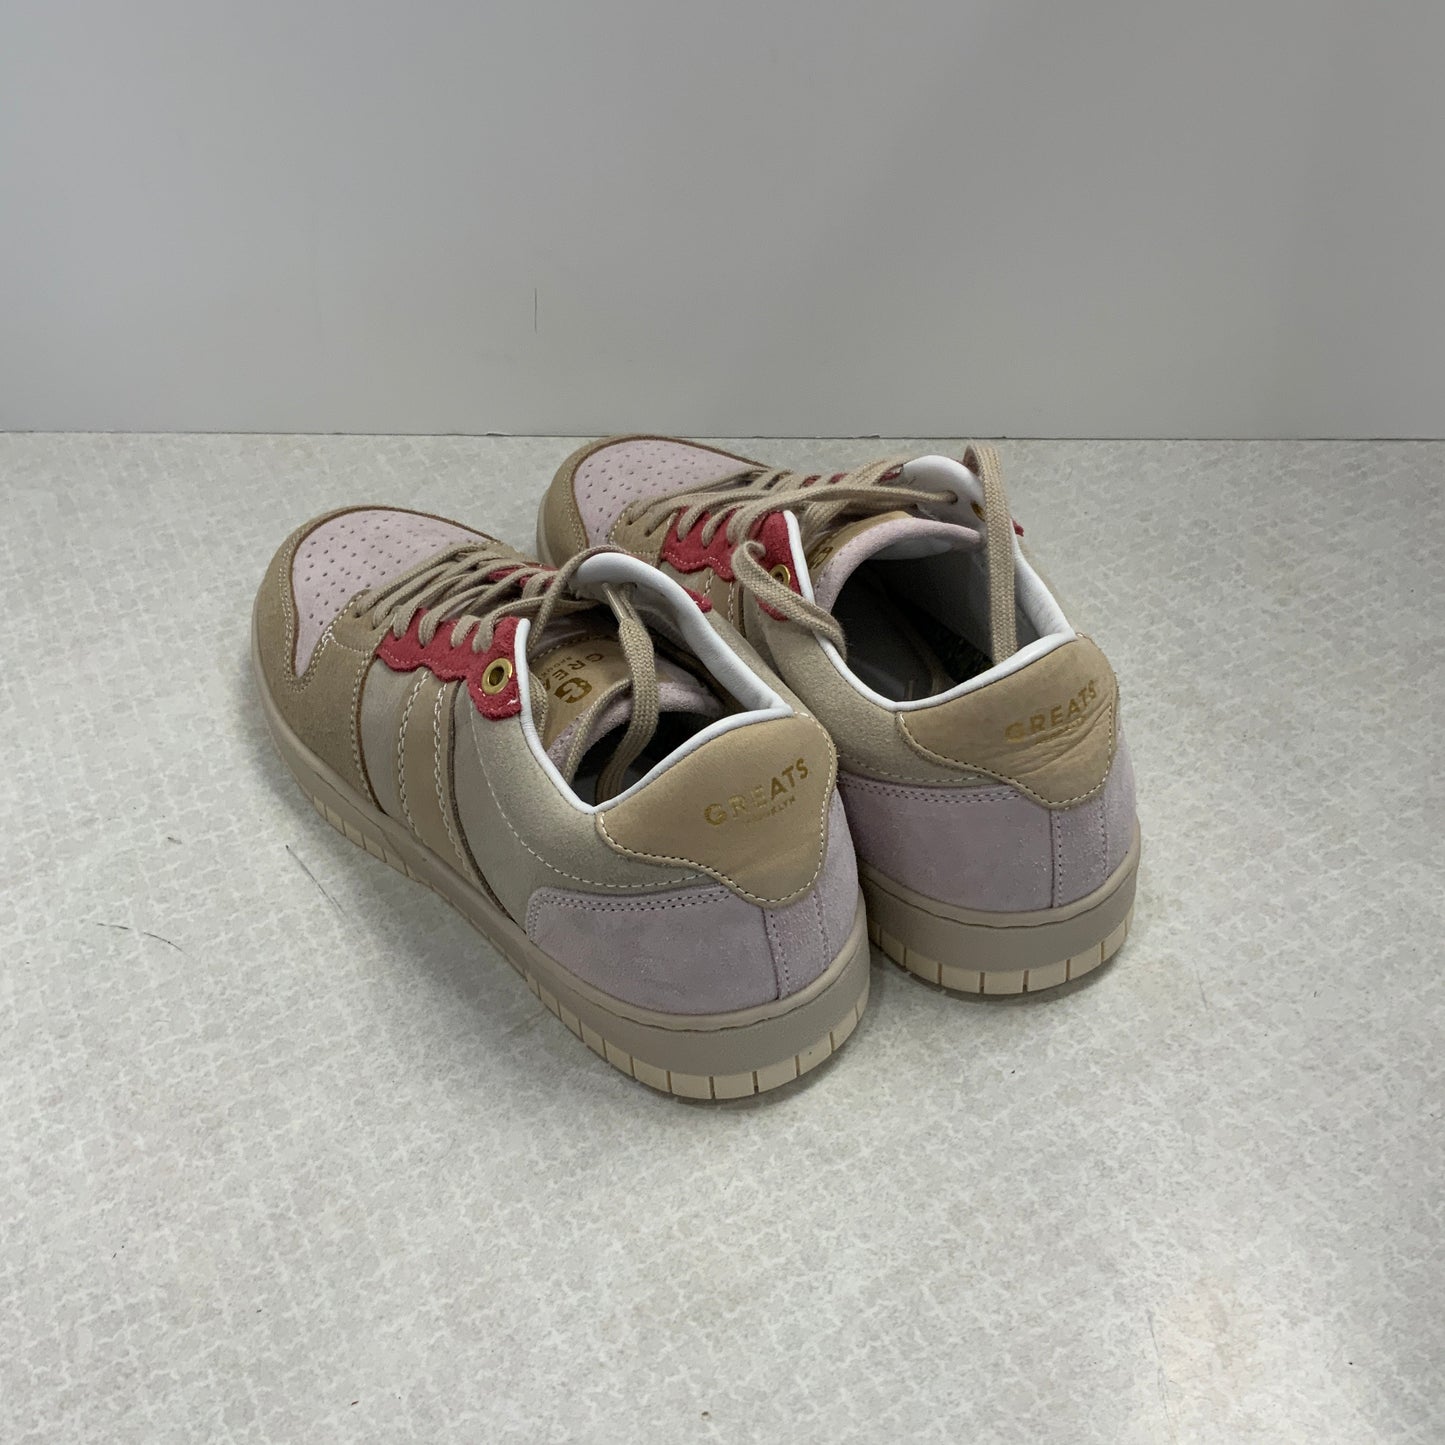 Pink & Tan Shoes Sneakers Great, Size 8